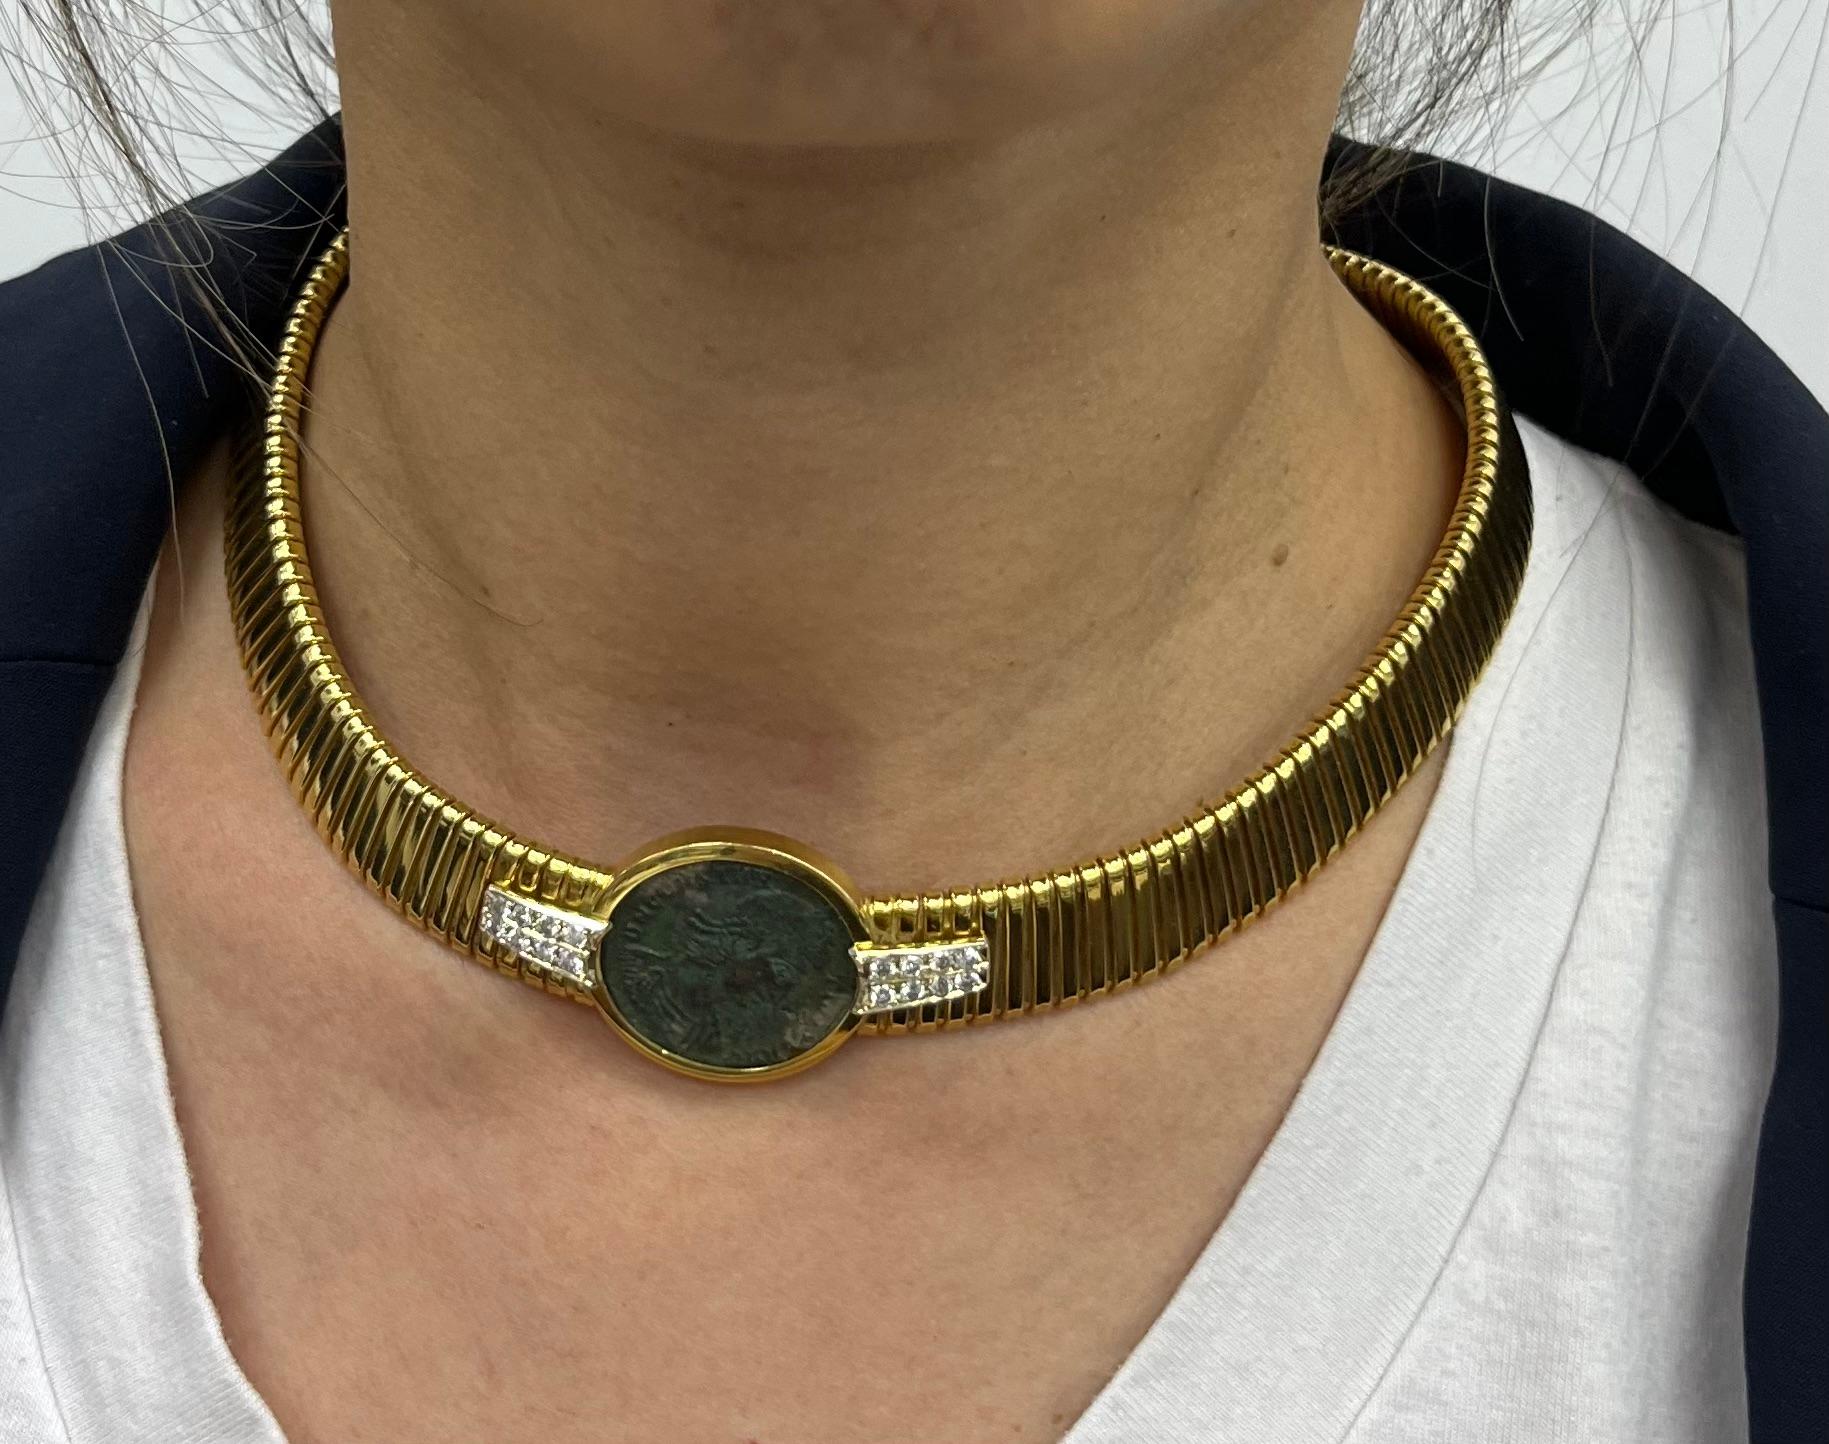 18K yellow gold ancient coin pendant flexiable choker necklace with 16 diamonds 
approx 0.96 carat total weight E-F color VS clarity
15.25 inches long 
Coin approx 1